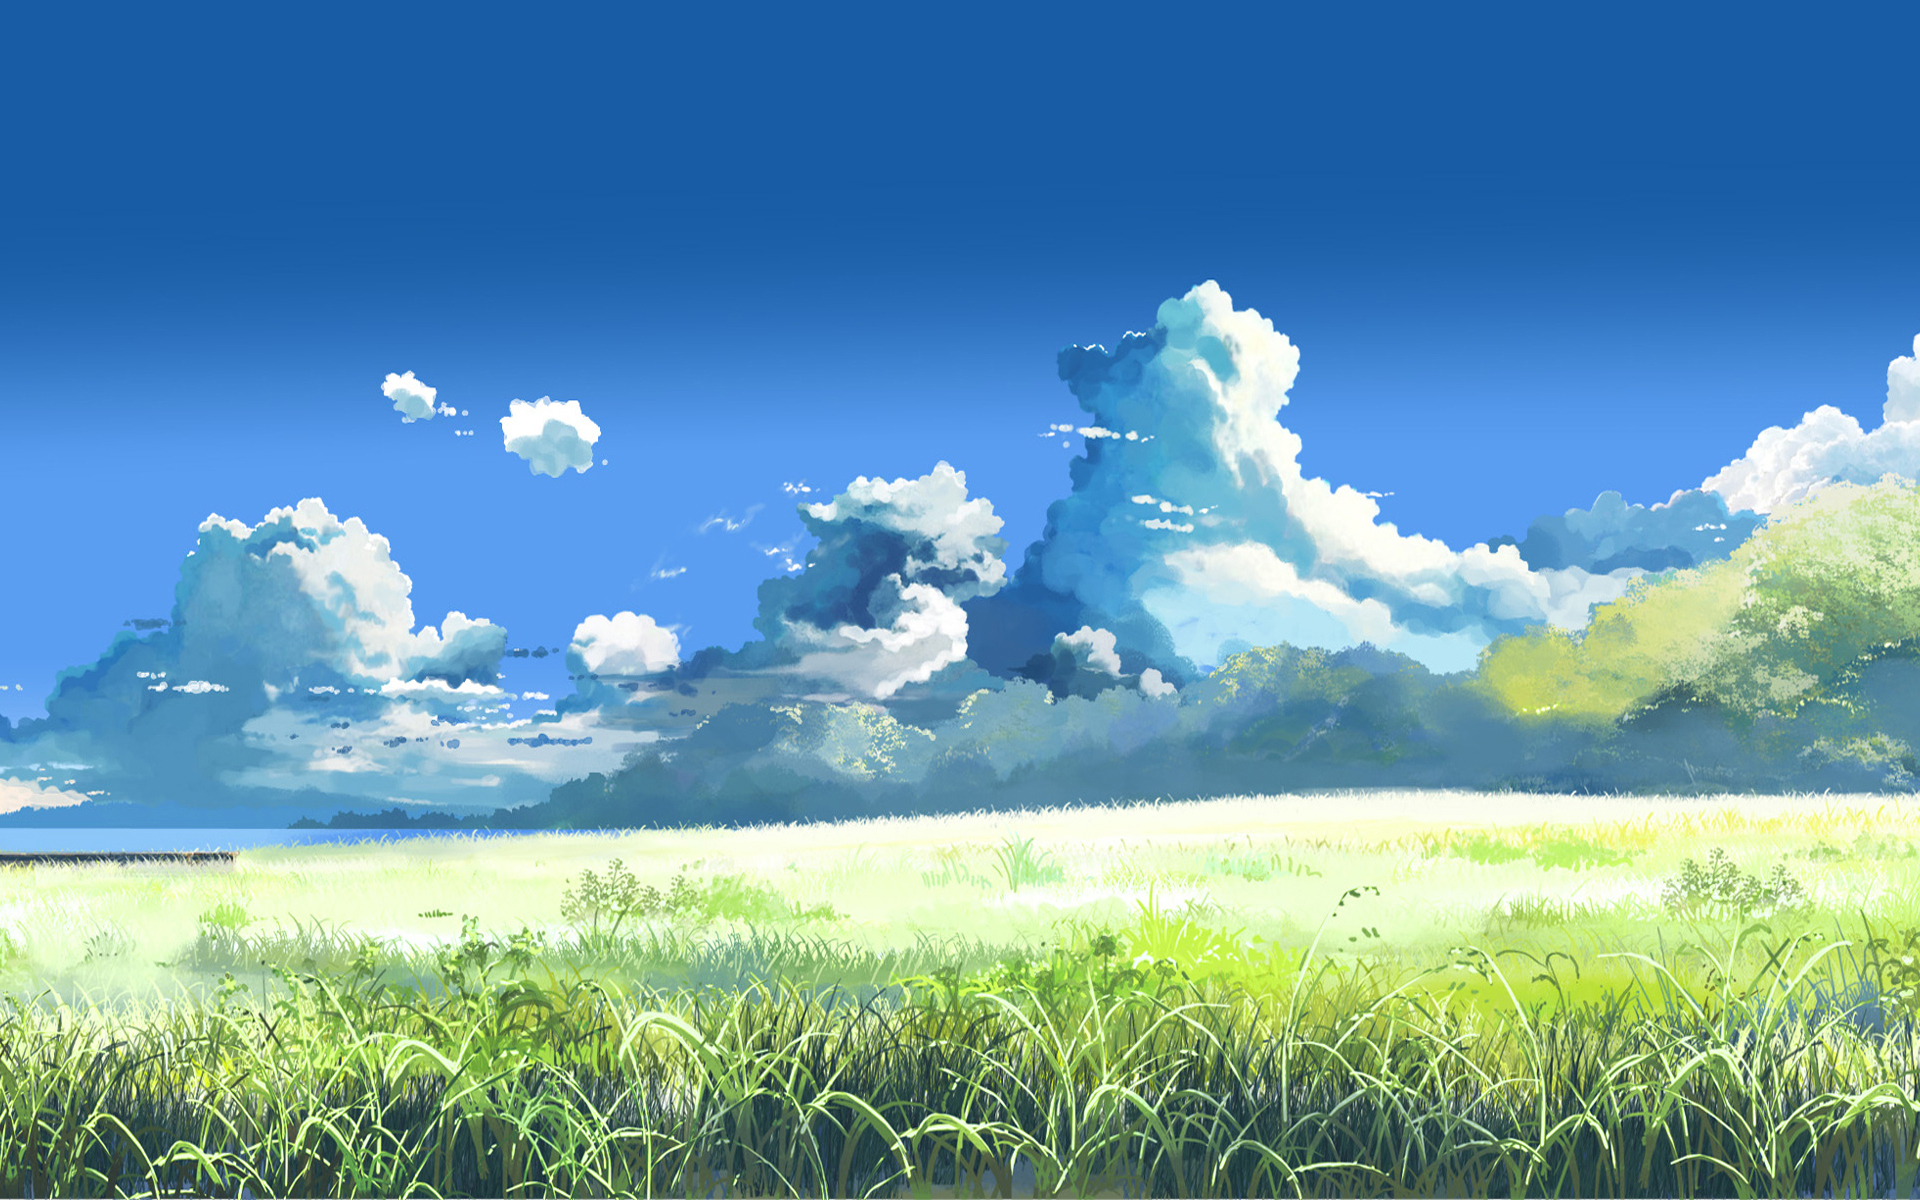 2211 Anime HD Wallpapers | Backgrounds - Wallpaper Abyss - Page 9